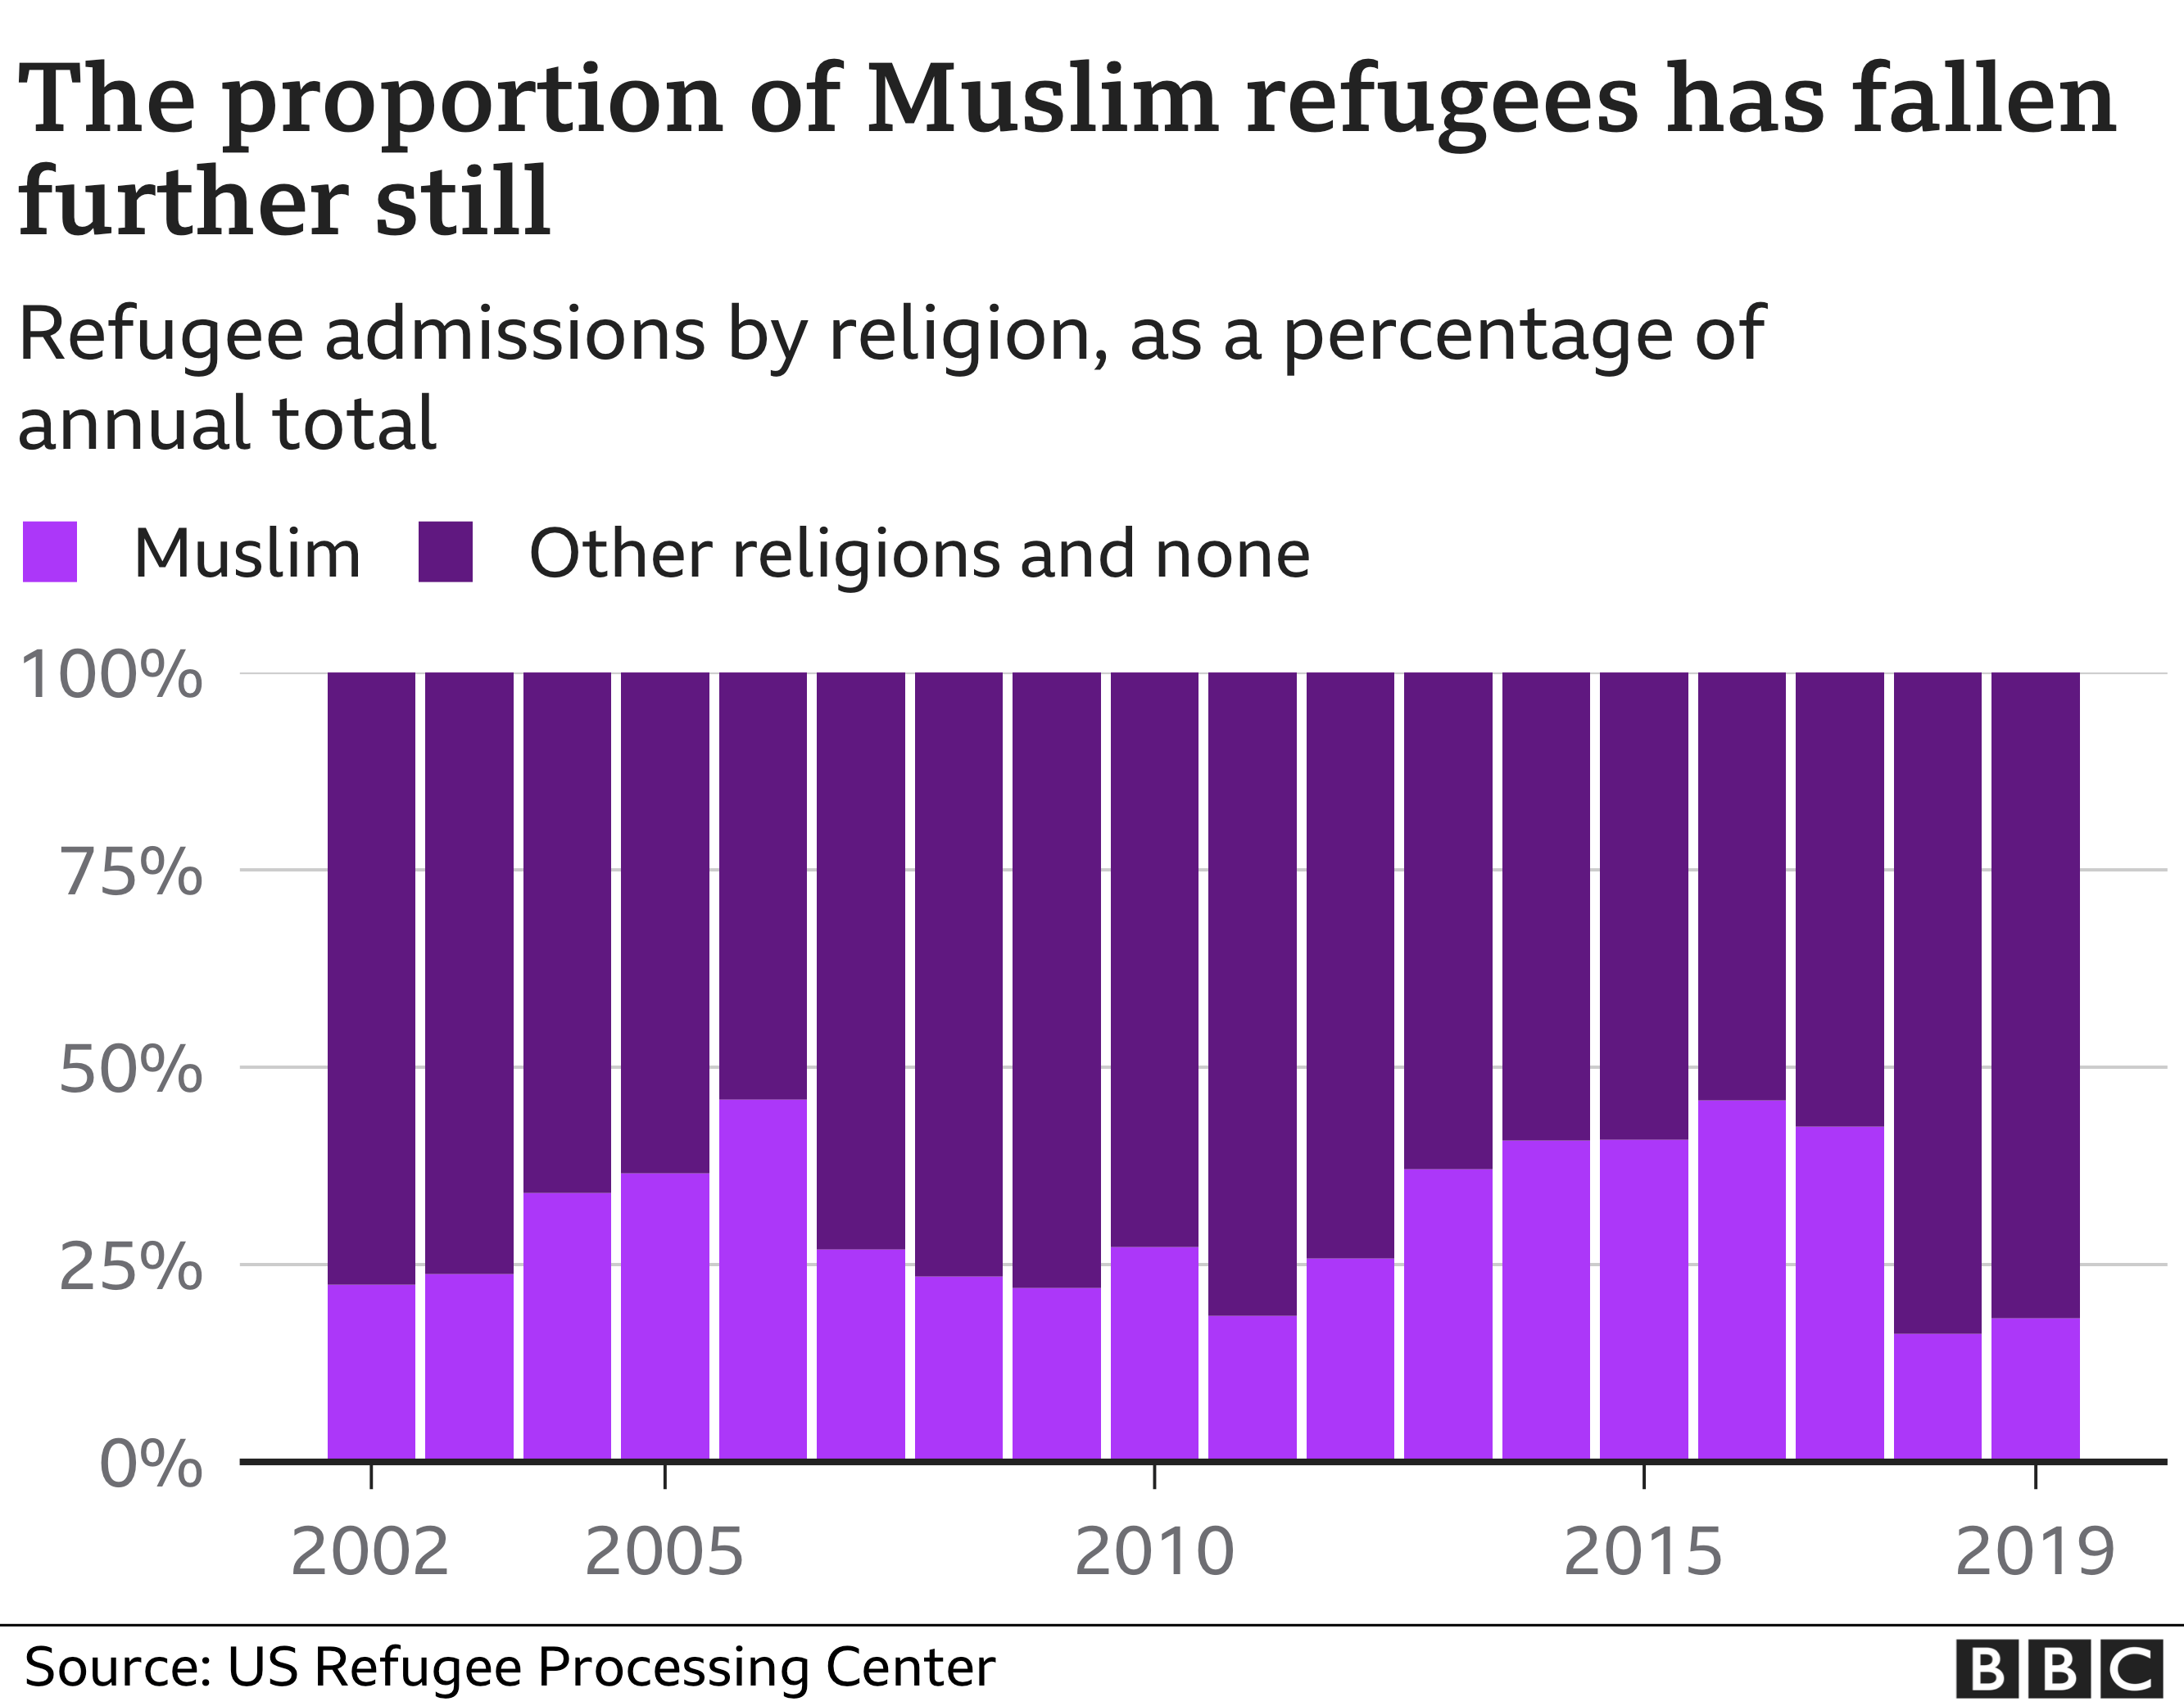 The proportion of Muslim refugees has fallen further still